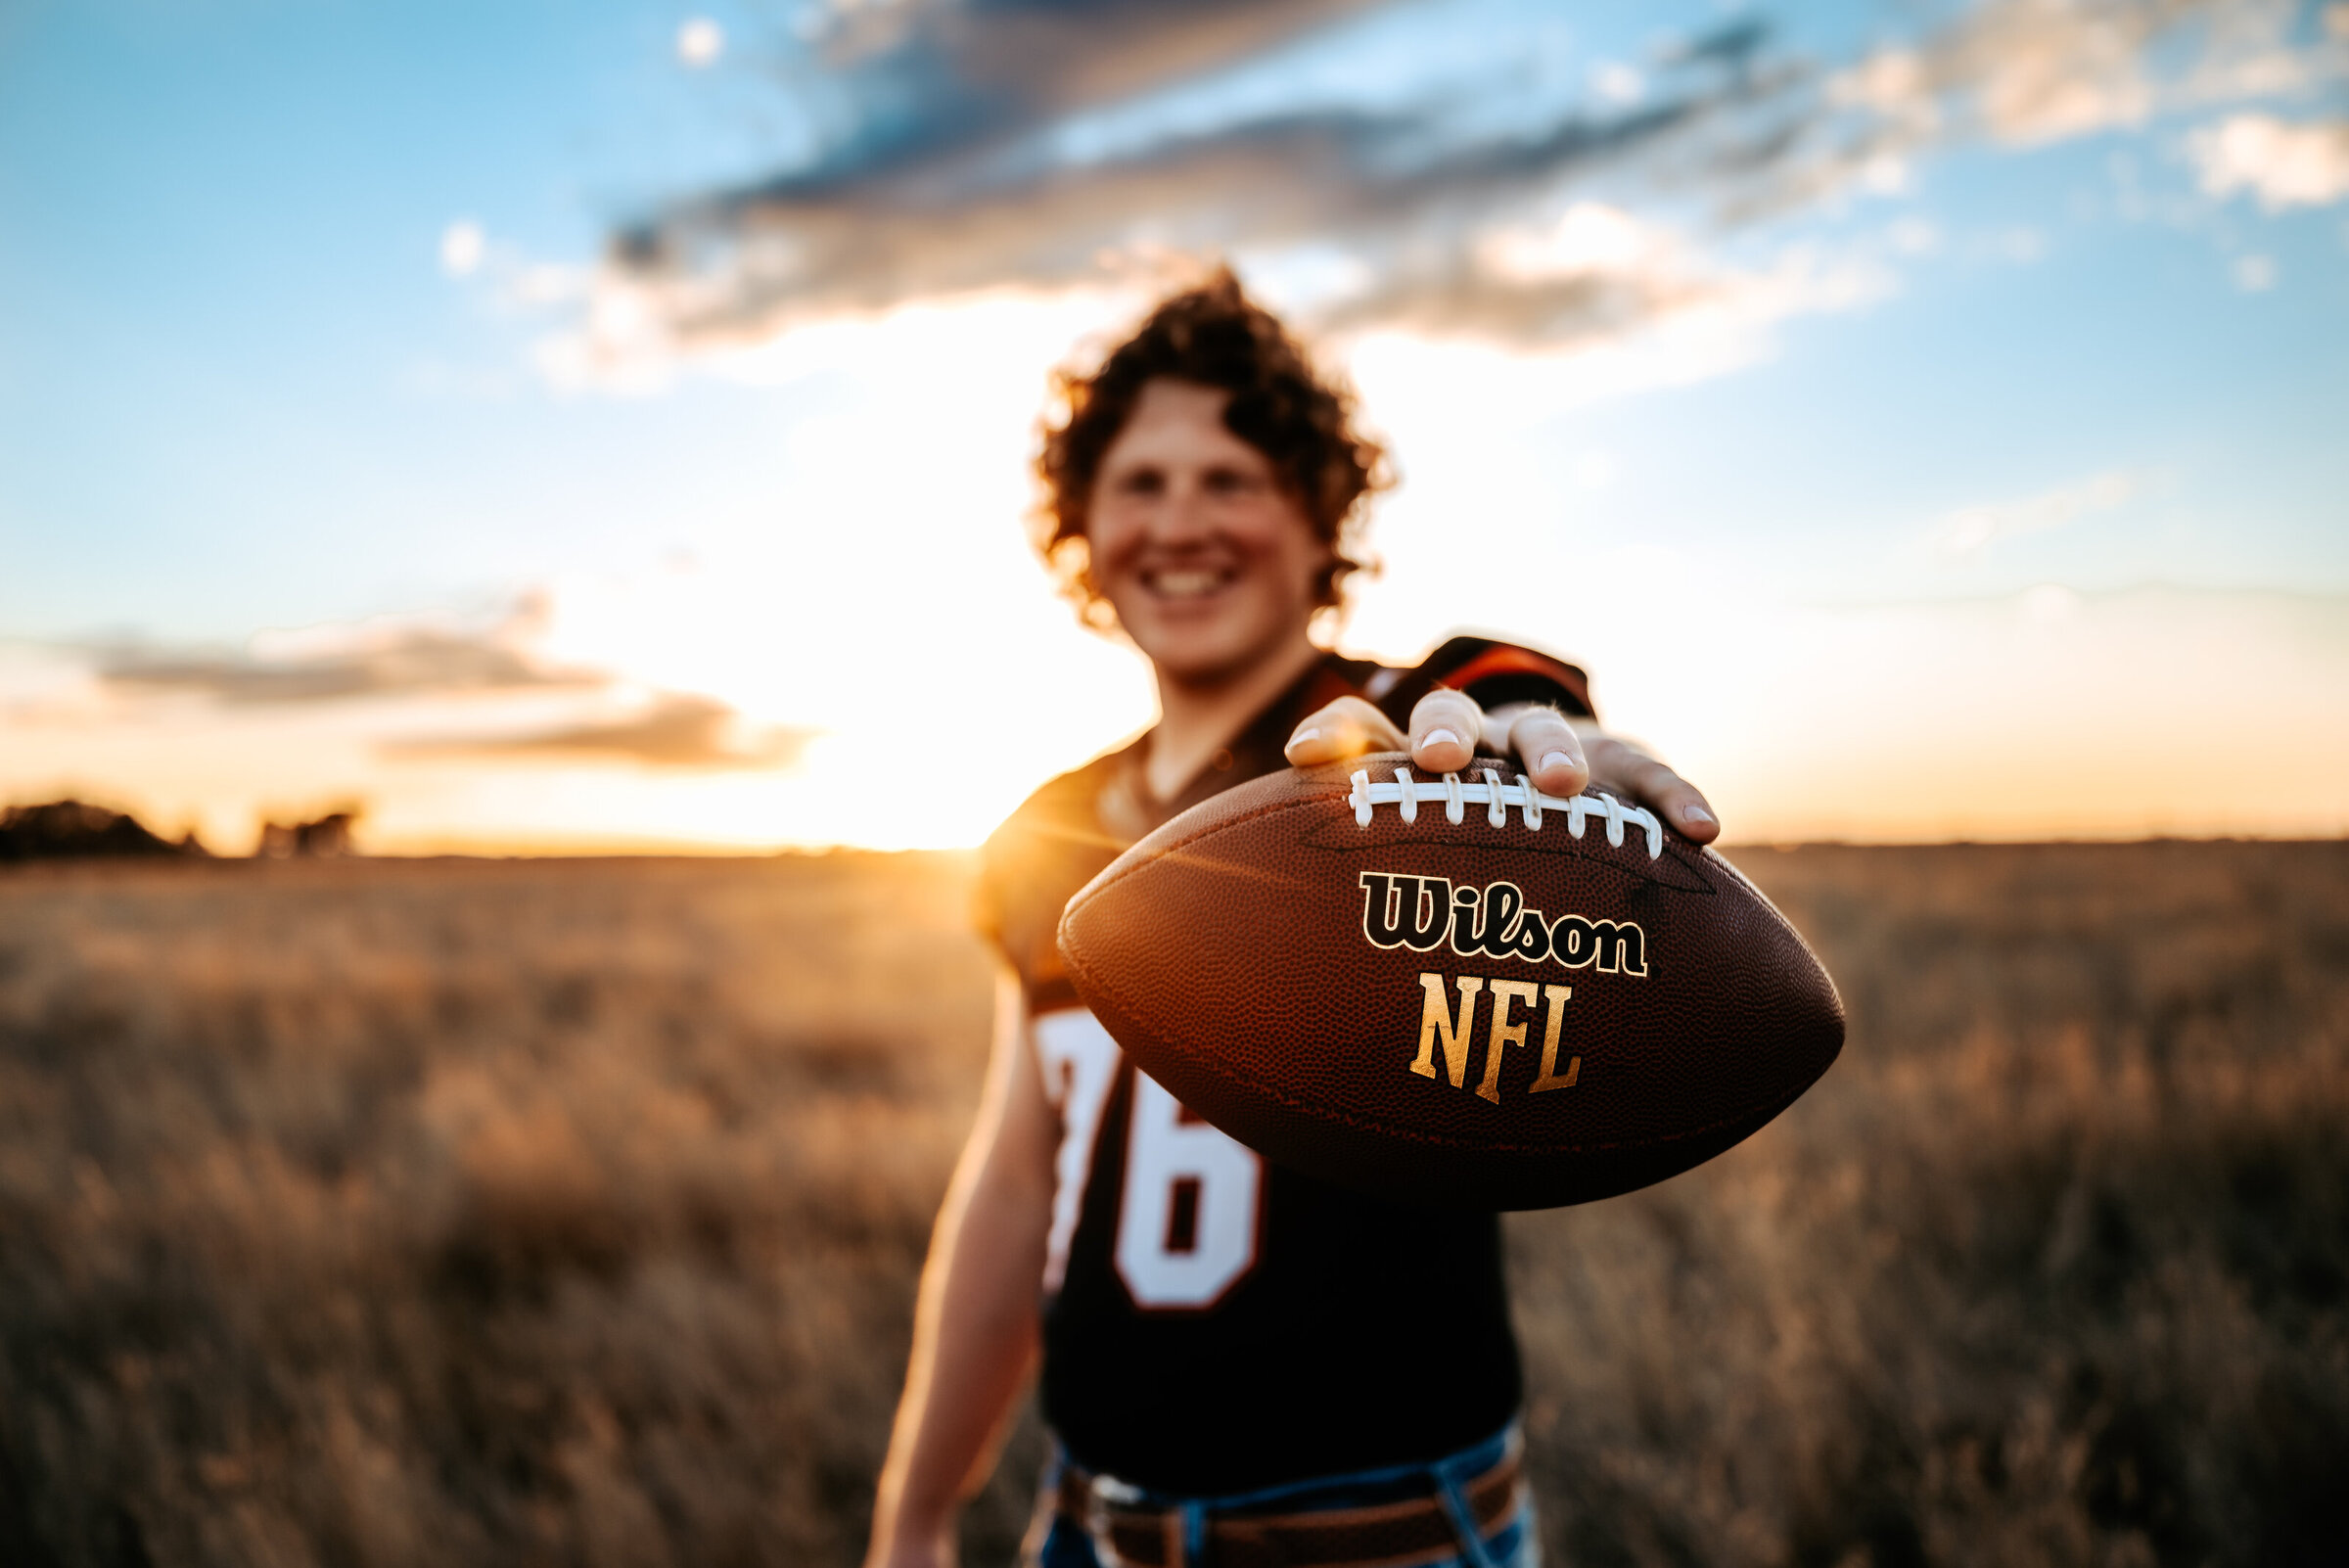 Senior wearing football jersey holds football in field at sunset